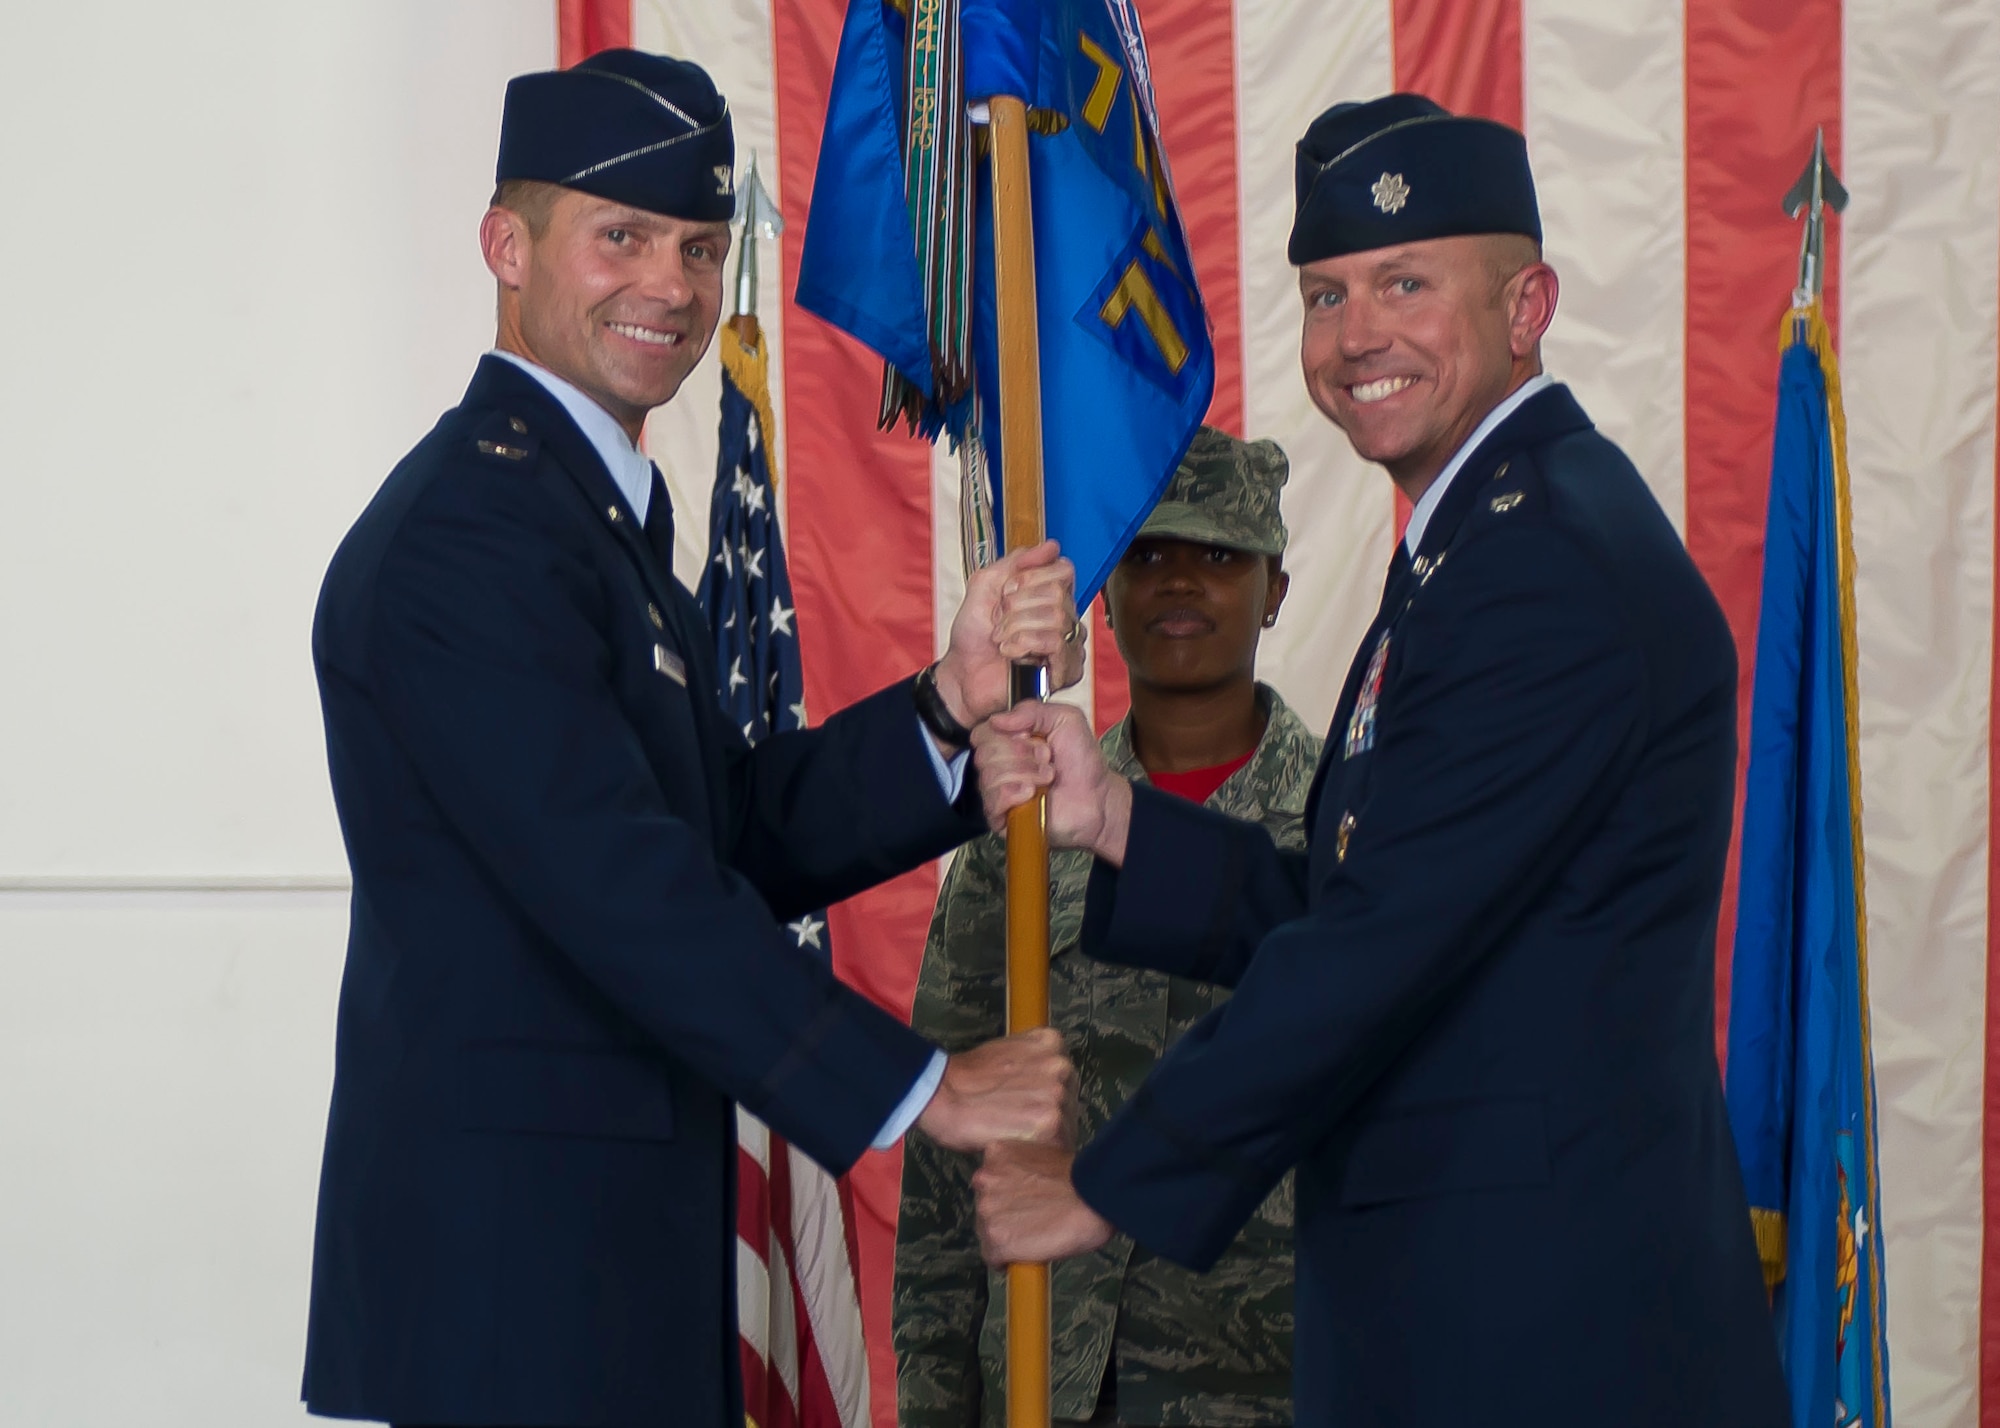 U.S. Air Force Col. Larry Broadwell, 1st Operations Group commander, left, passes a squadron guidon to Lt. Col. Brian Coyne, right, who assumed command of the 71st Fighter Training Squadron during a reactivation ceremony at Langley Air Force Base, Va., Aug. 21, 2015. Originally formed in December 1940 as the 71st Pursuit Squadron, the unit was re-designated during the ceremony and will now aid the 1st Fighter Wing by providing realistic adversarial air training support. (U.S. Air Force photo by Staff Sgt. John D. Strong II/Released)